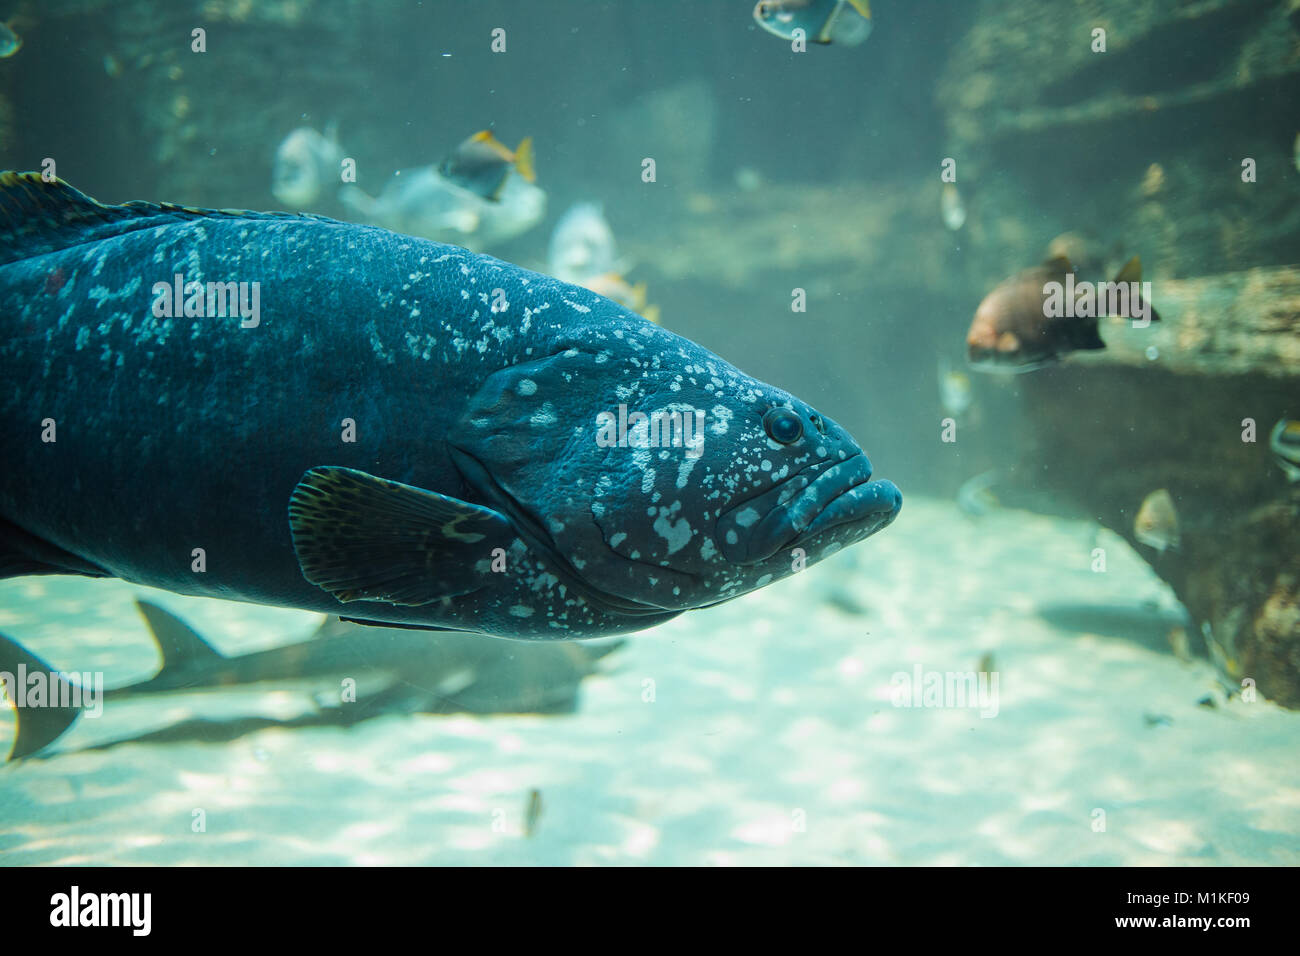 Close up under water photo of a Brindle bass Stock Photo